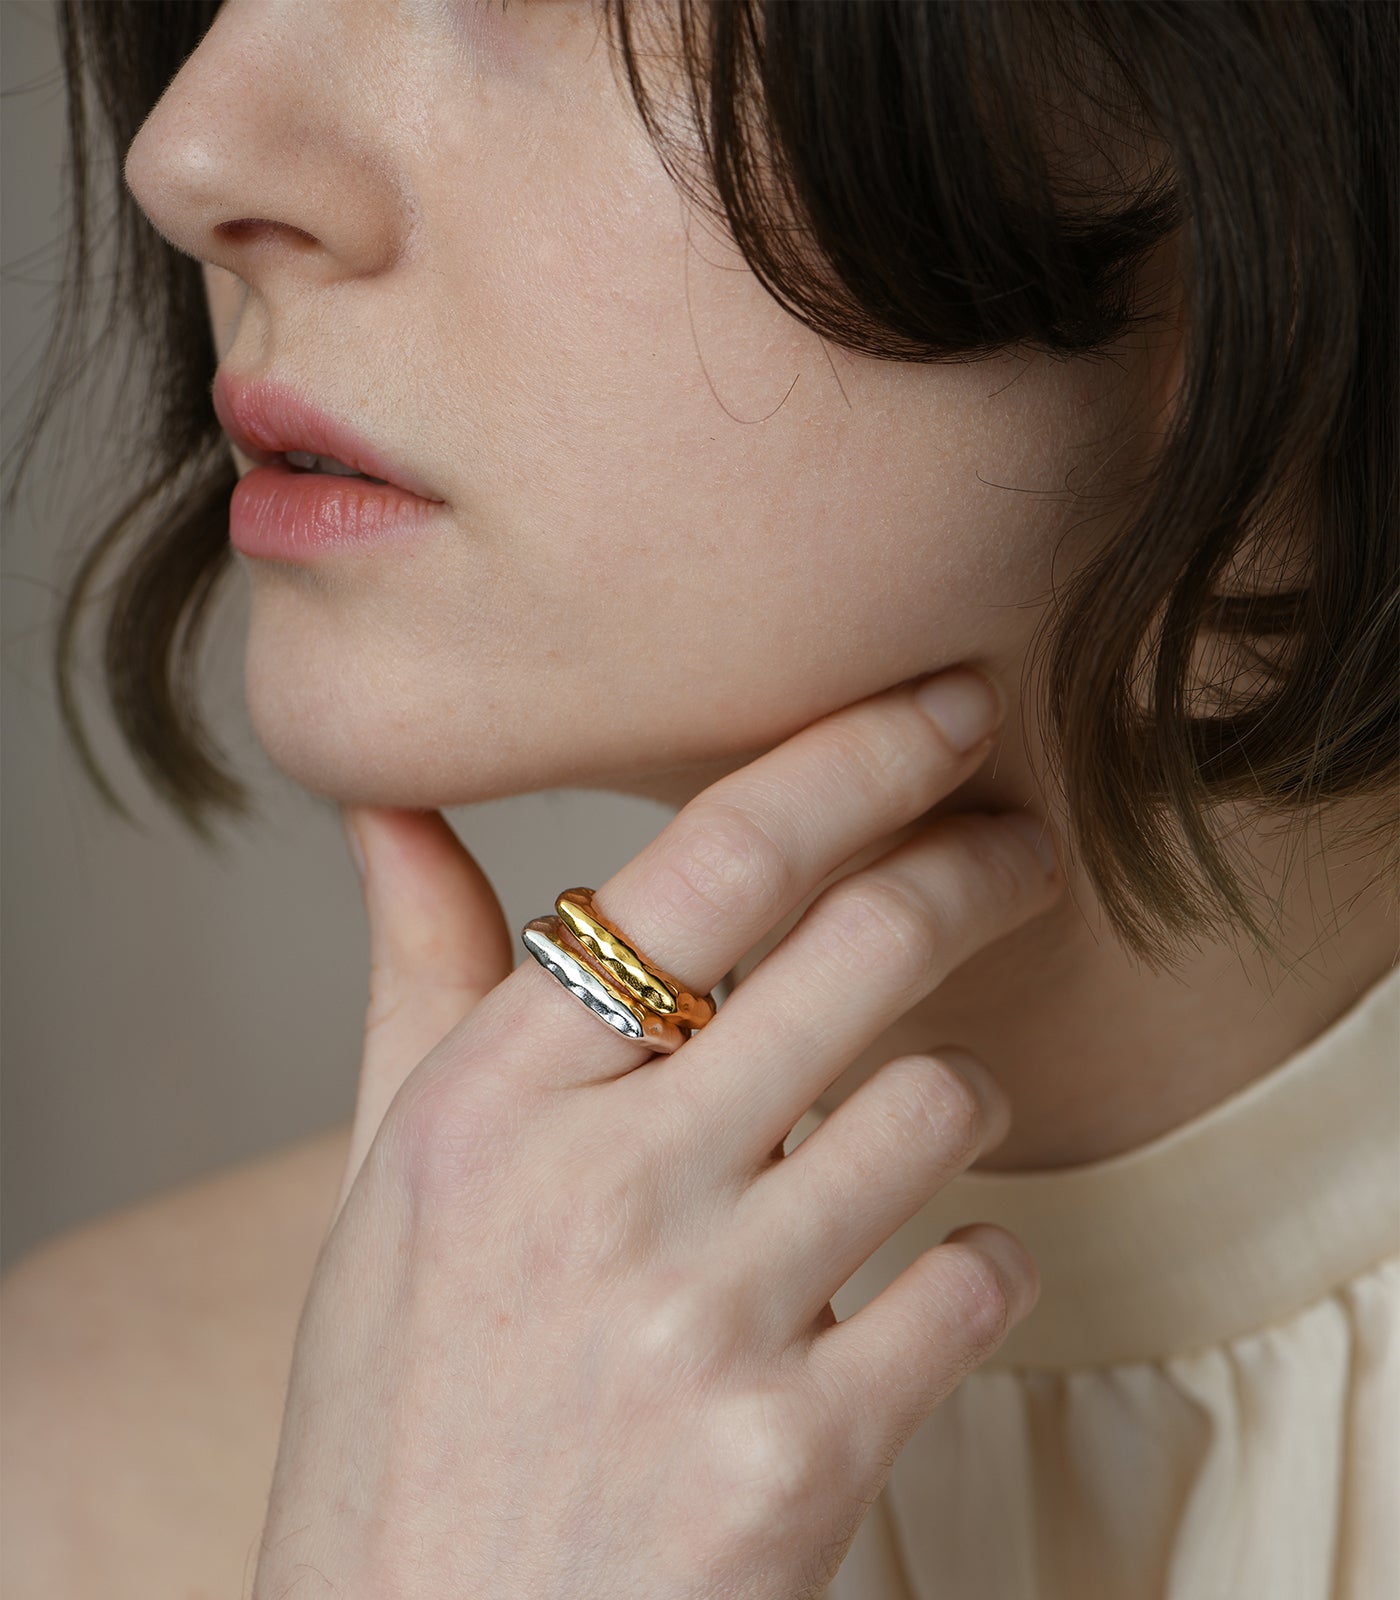 A model wears two open band, plateau rings. One ring is sterling silver while the other has a gold vermeil.